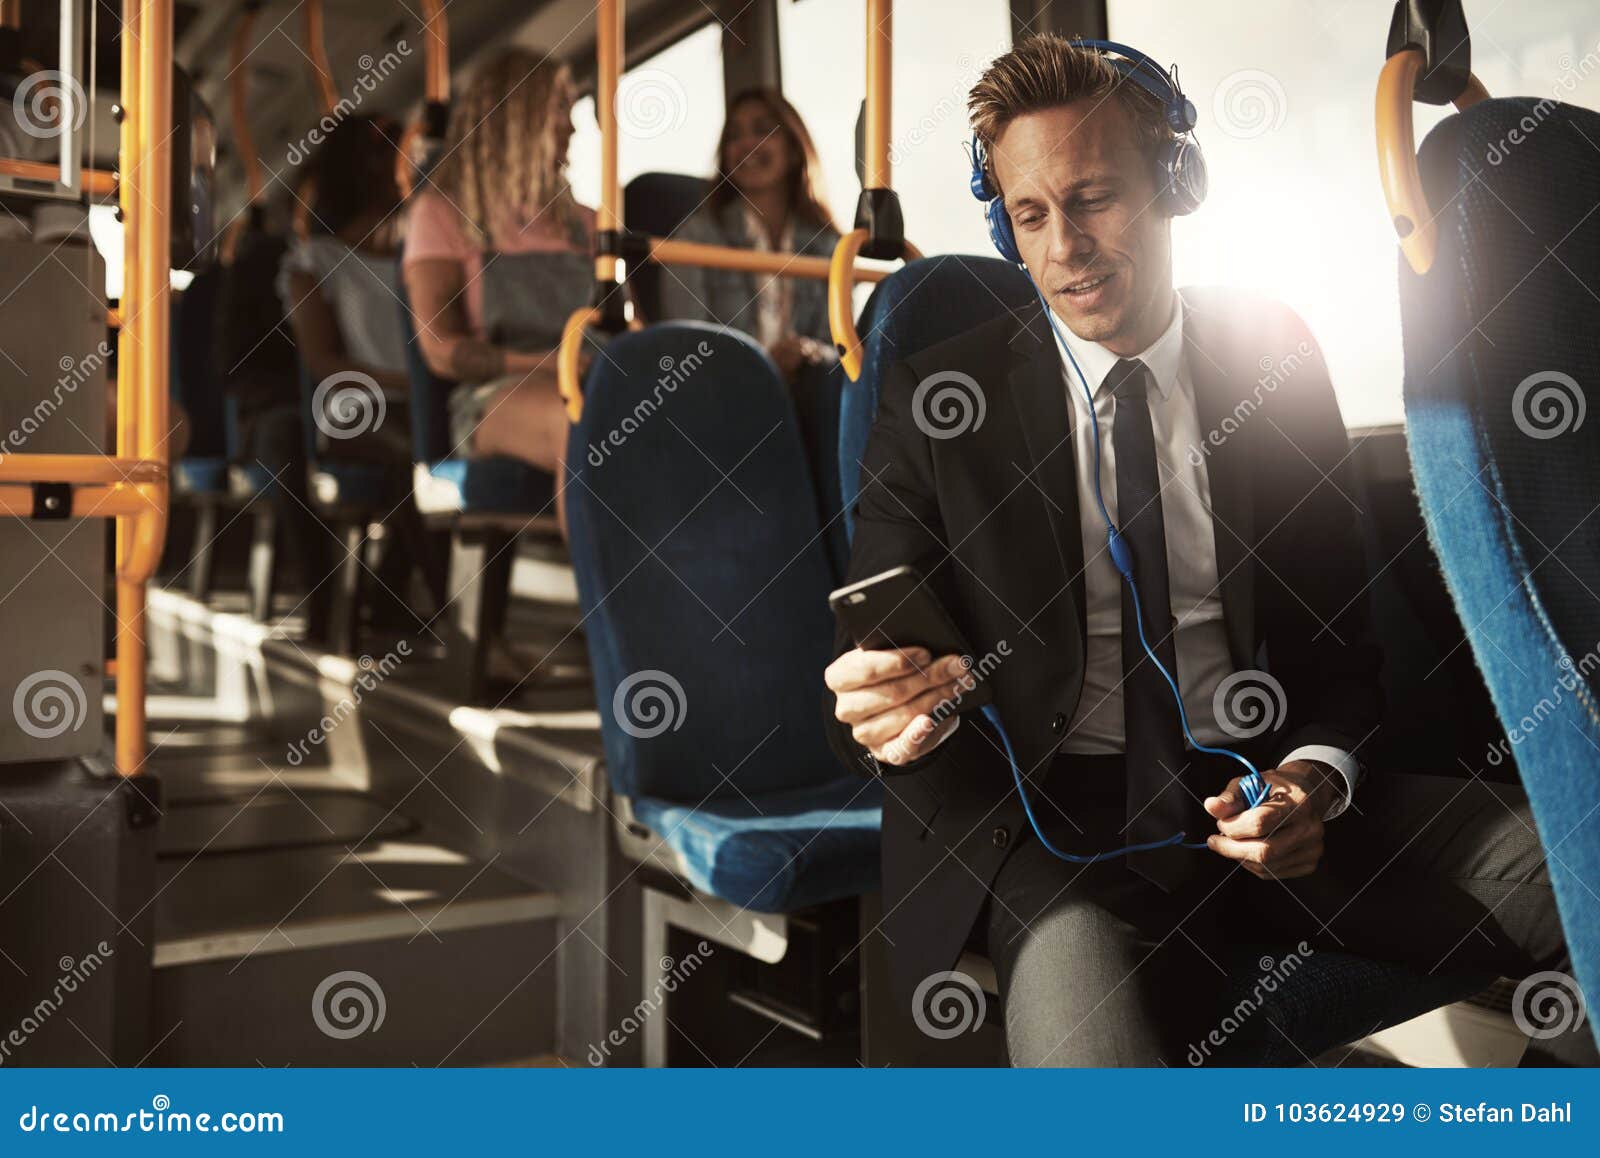 young businessman listening to music on his morning commute